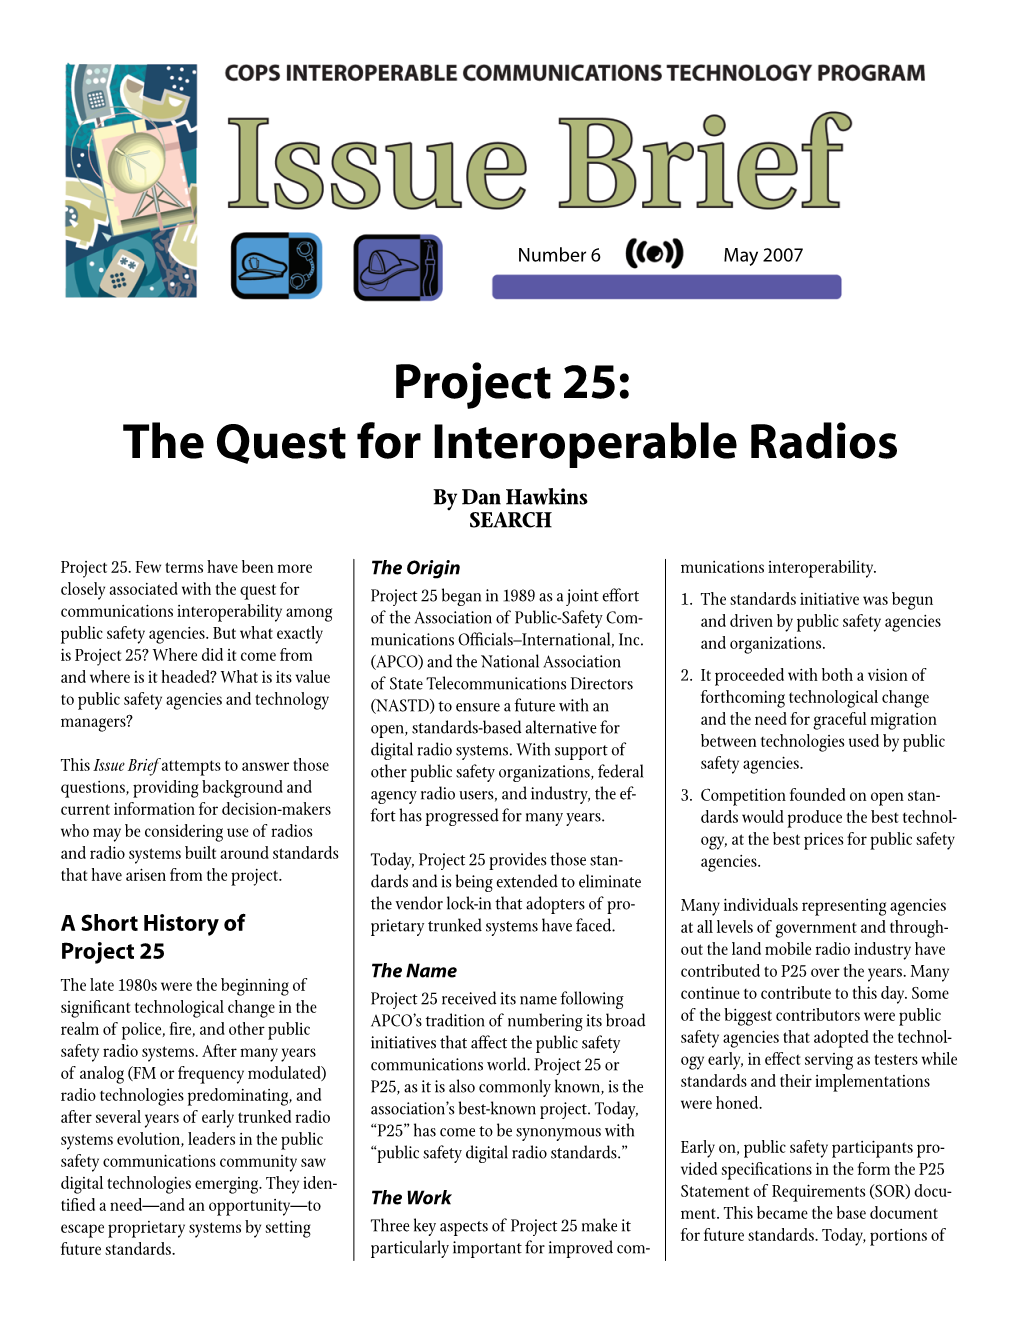 Project 25: the Quest for Interoperable Radios by Dan Hawkins SEARCH